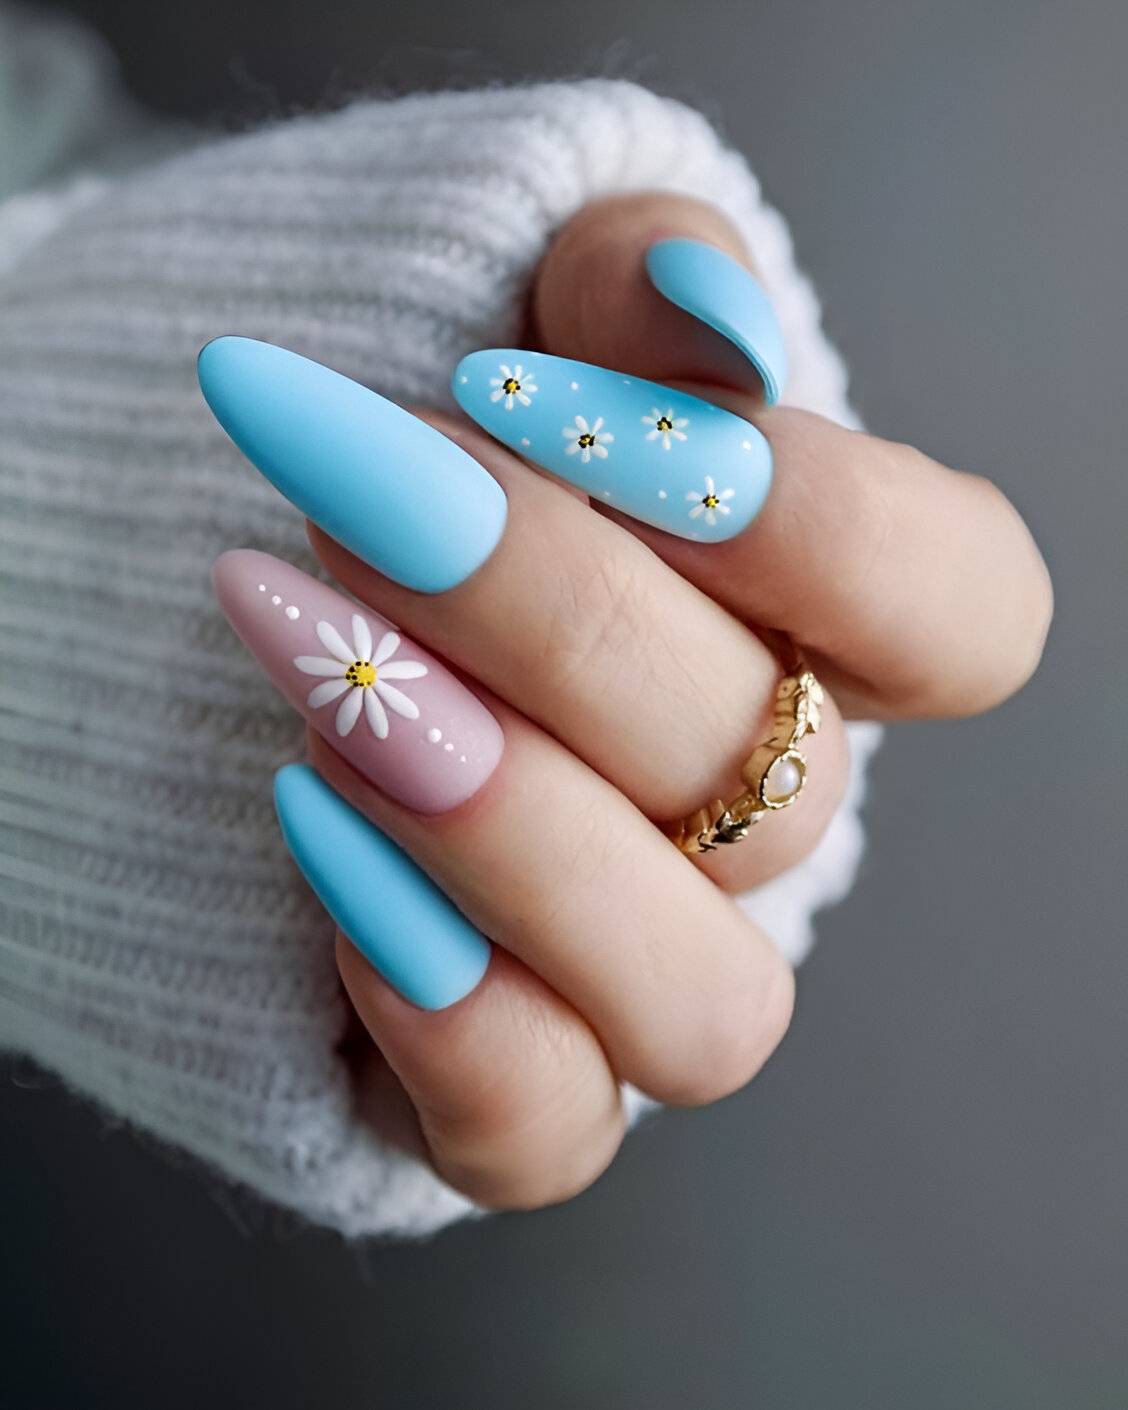 30 Gorgeous Flower Nail Designs No Pretty Girl Should Miss - 221